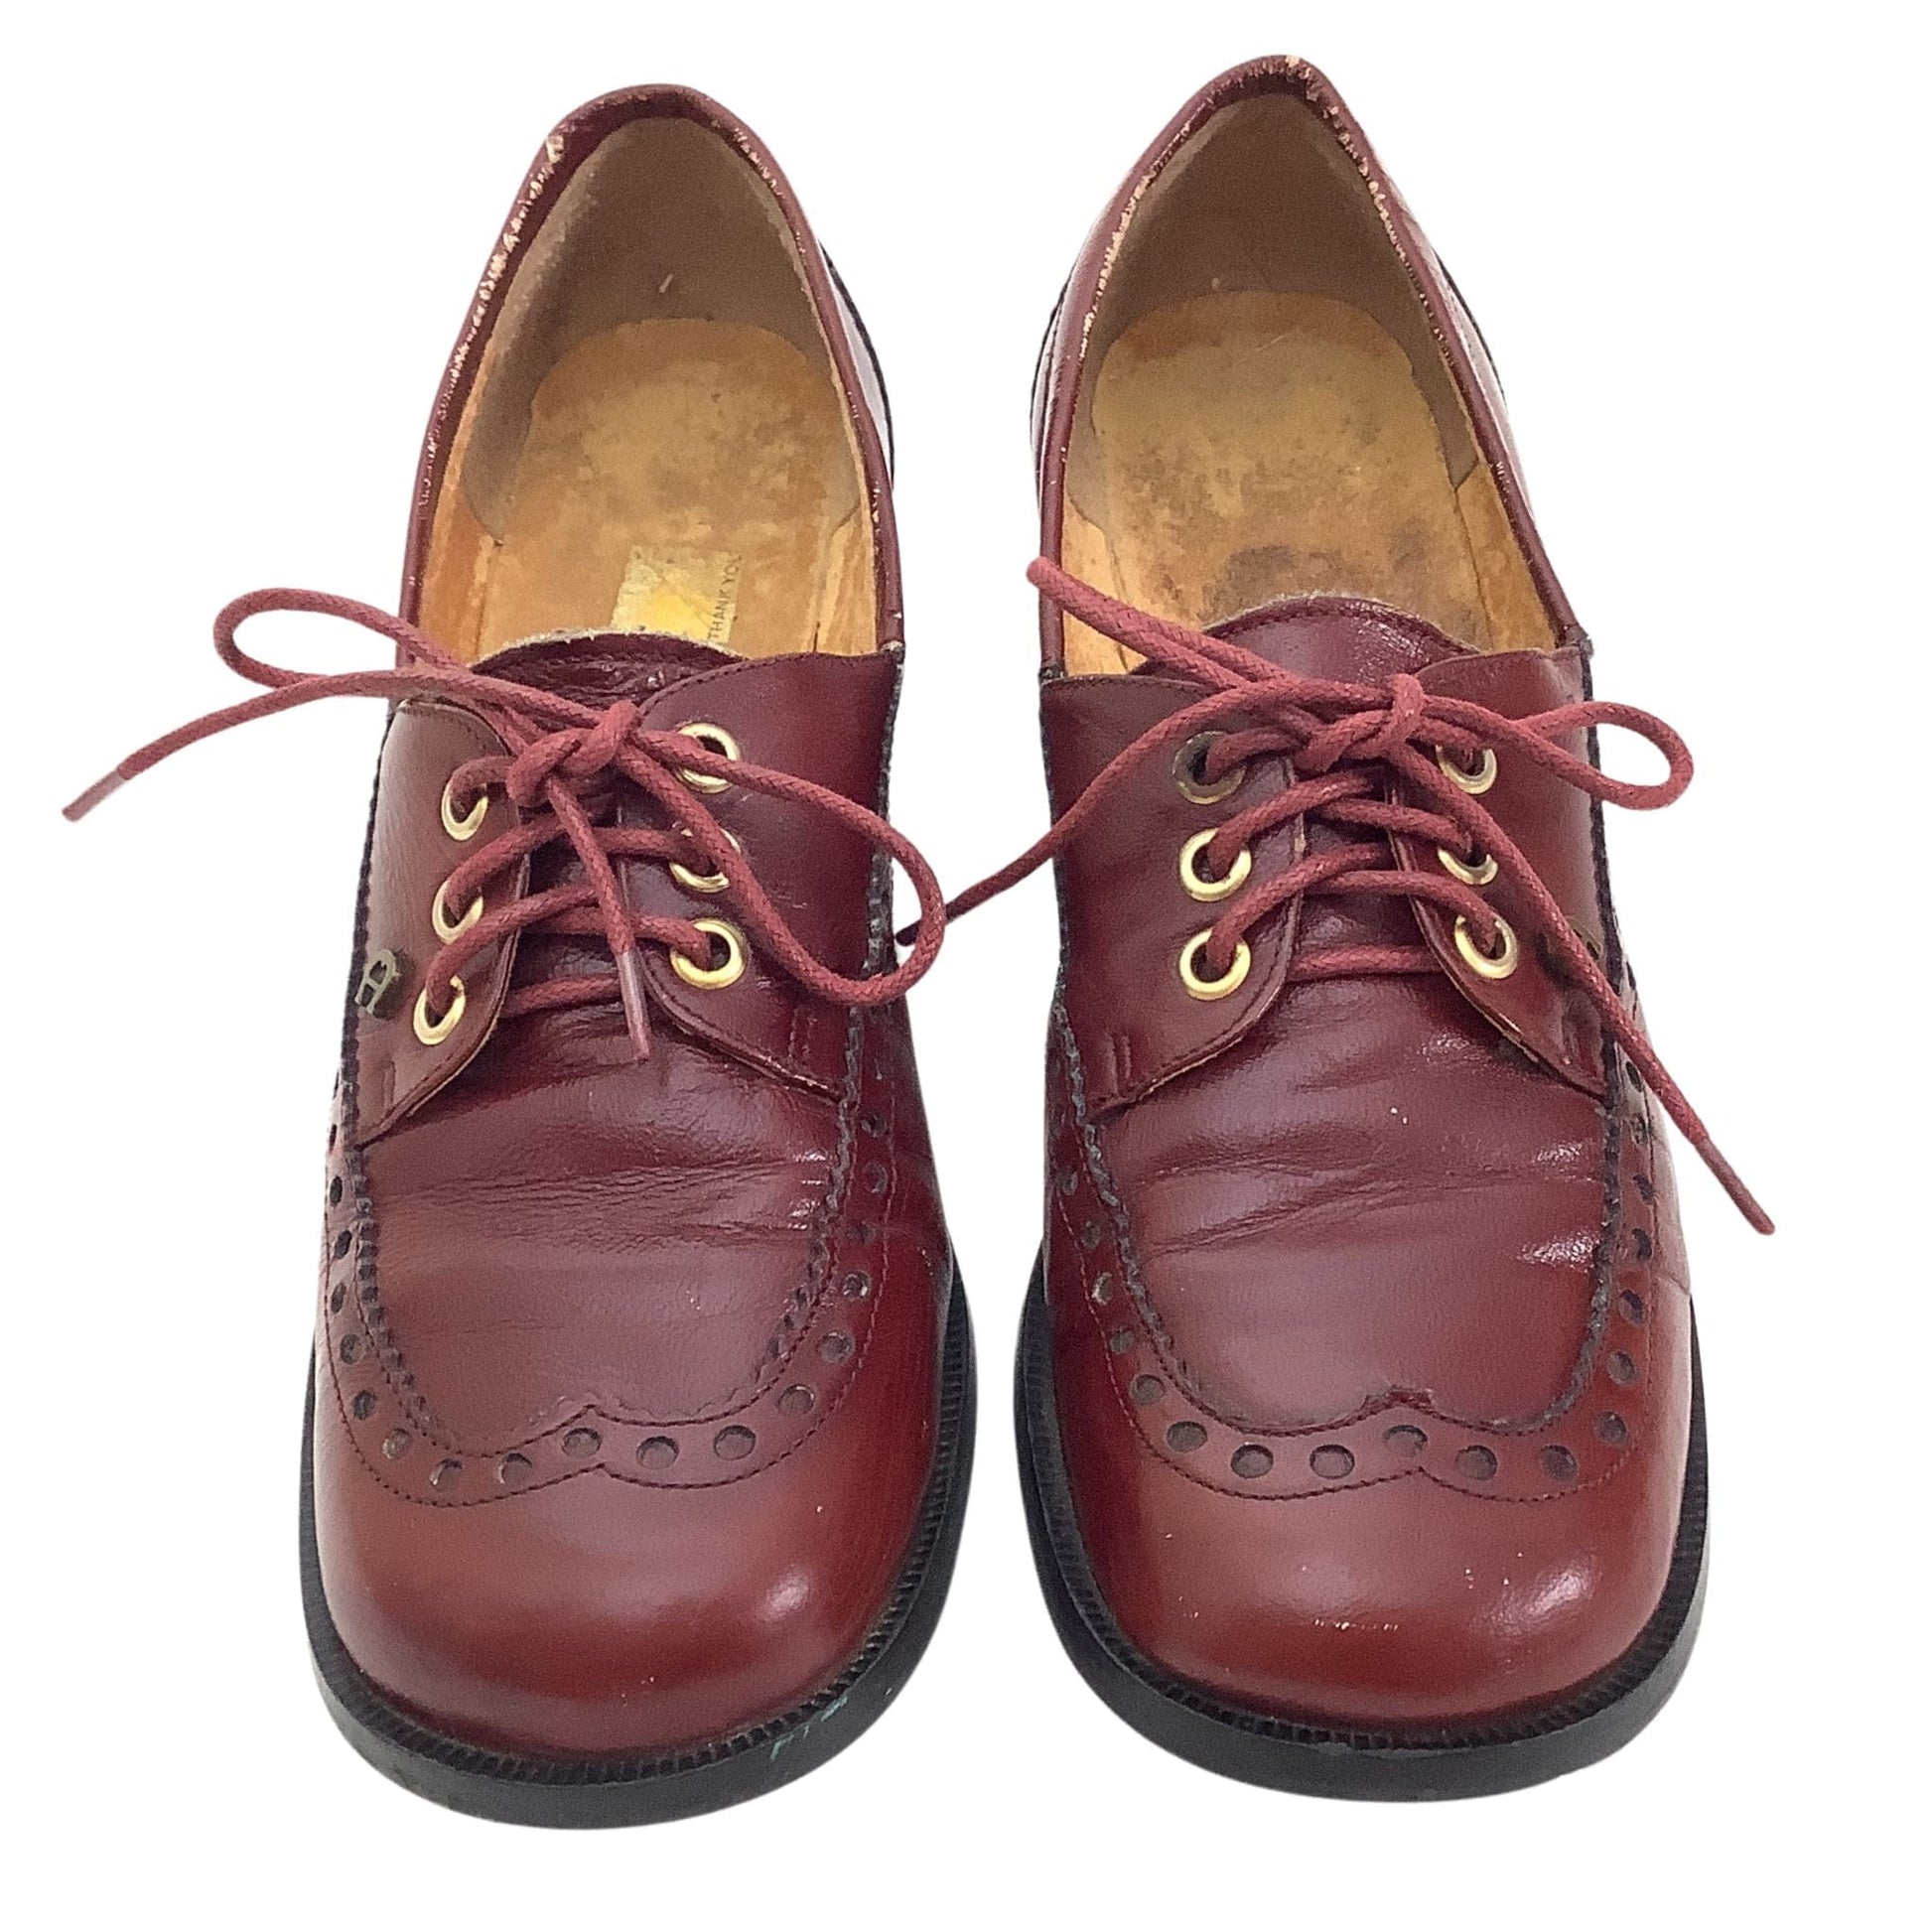 Aigner Lace up Brogues 8 / Oxblood / Mod